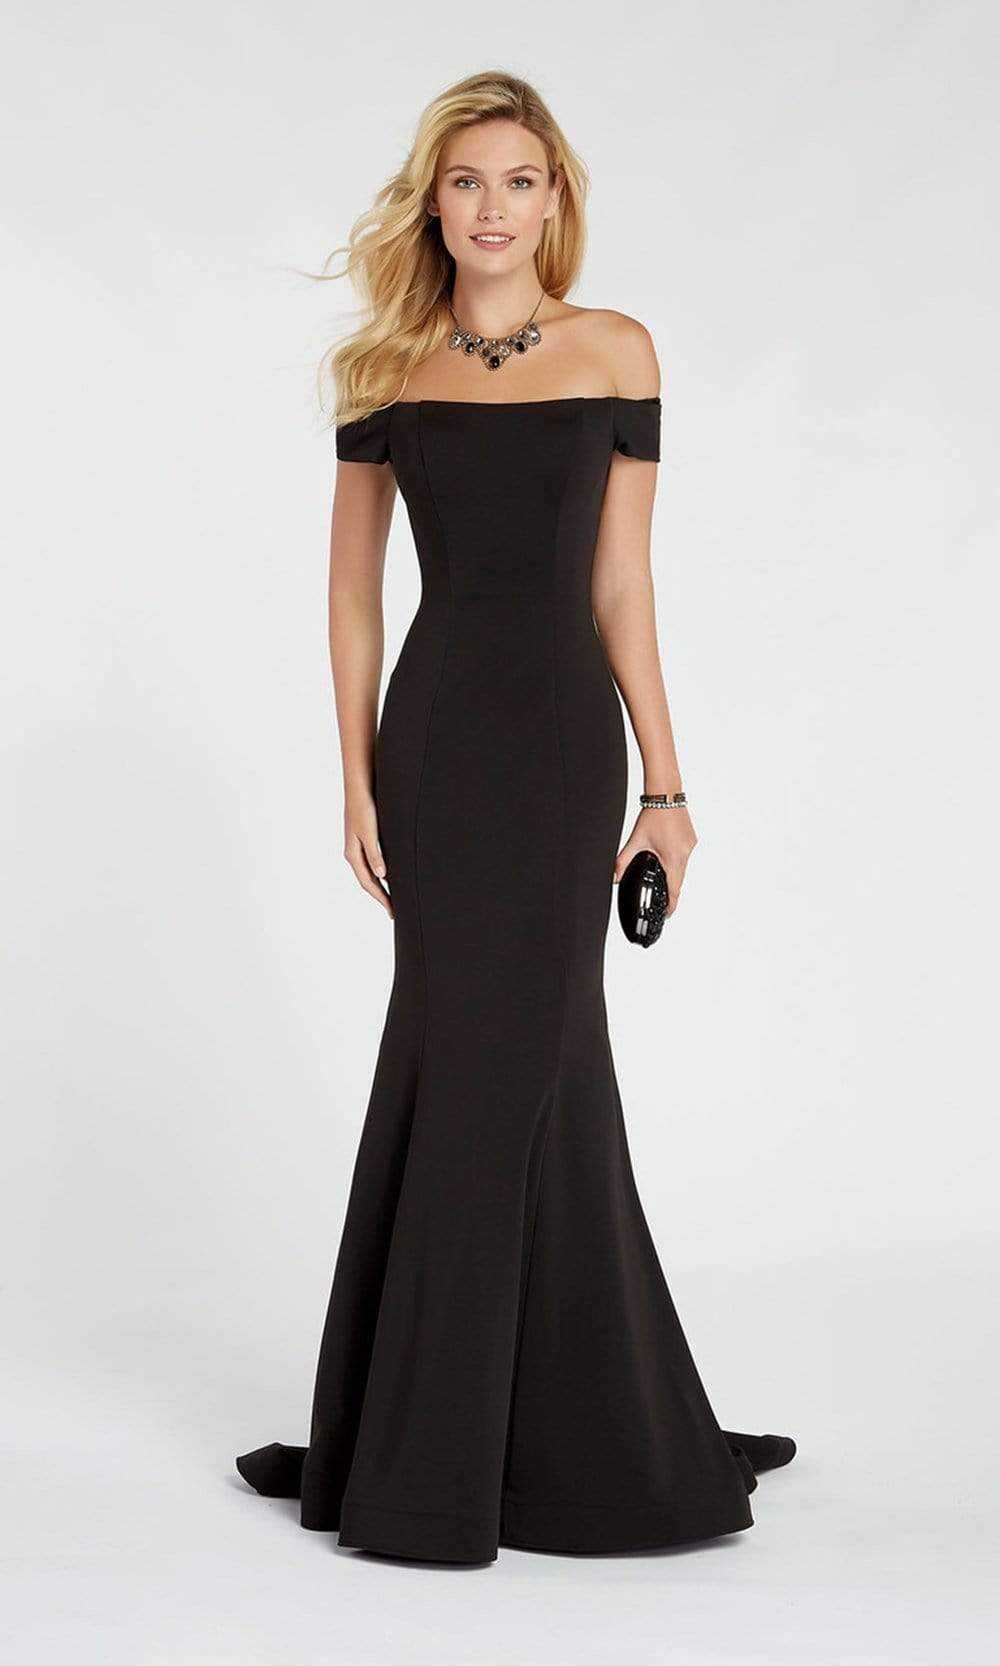 Alyce Paris, Alyce Paris - Off Shoulder Jersey Mermaid Evening Gown 60294 - 2 pcs Navy in Size 4 and 10 and 1 pc Black in Size 8 Available